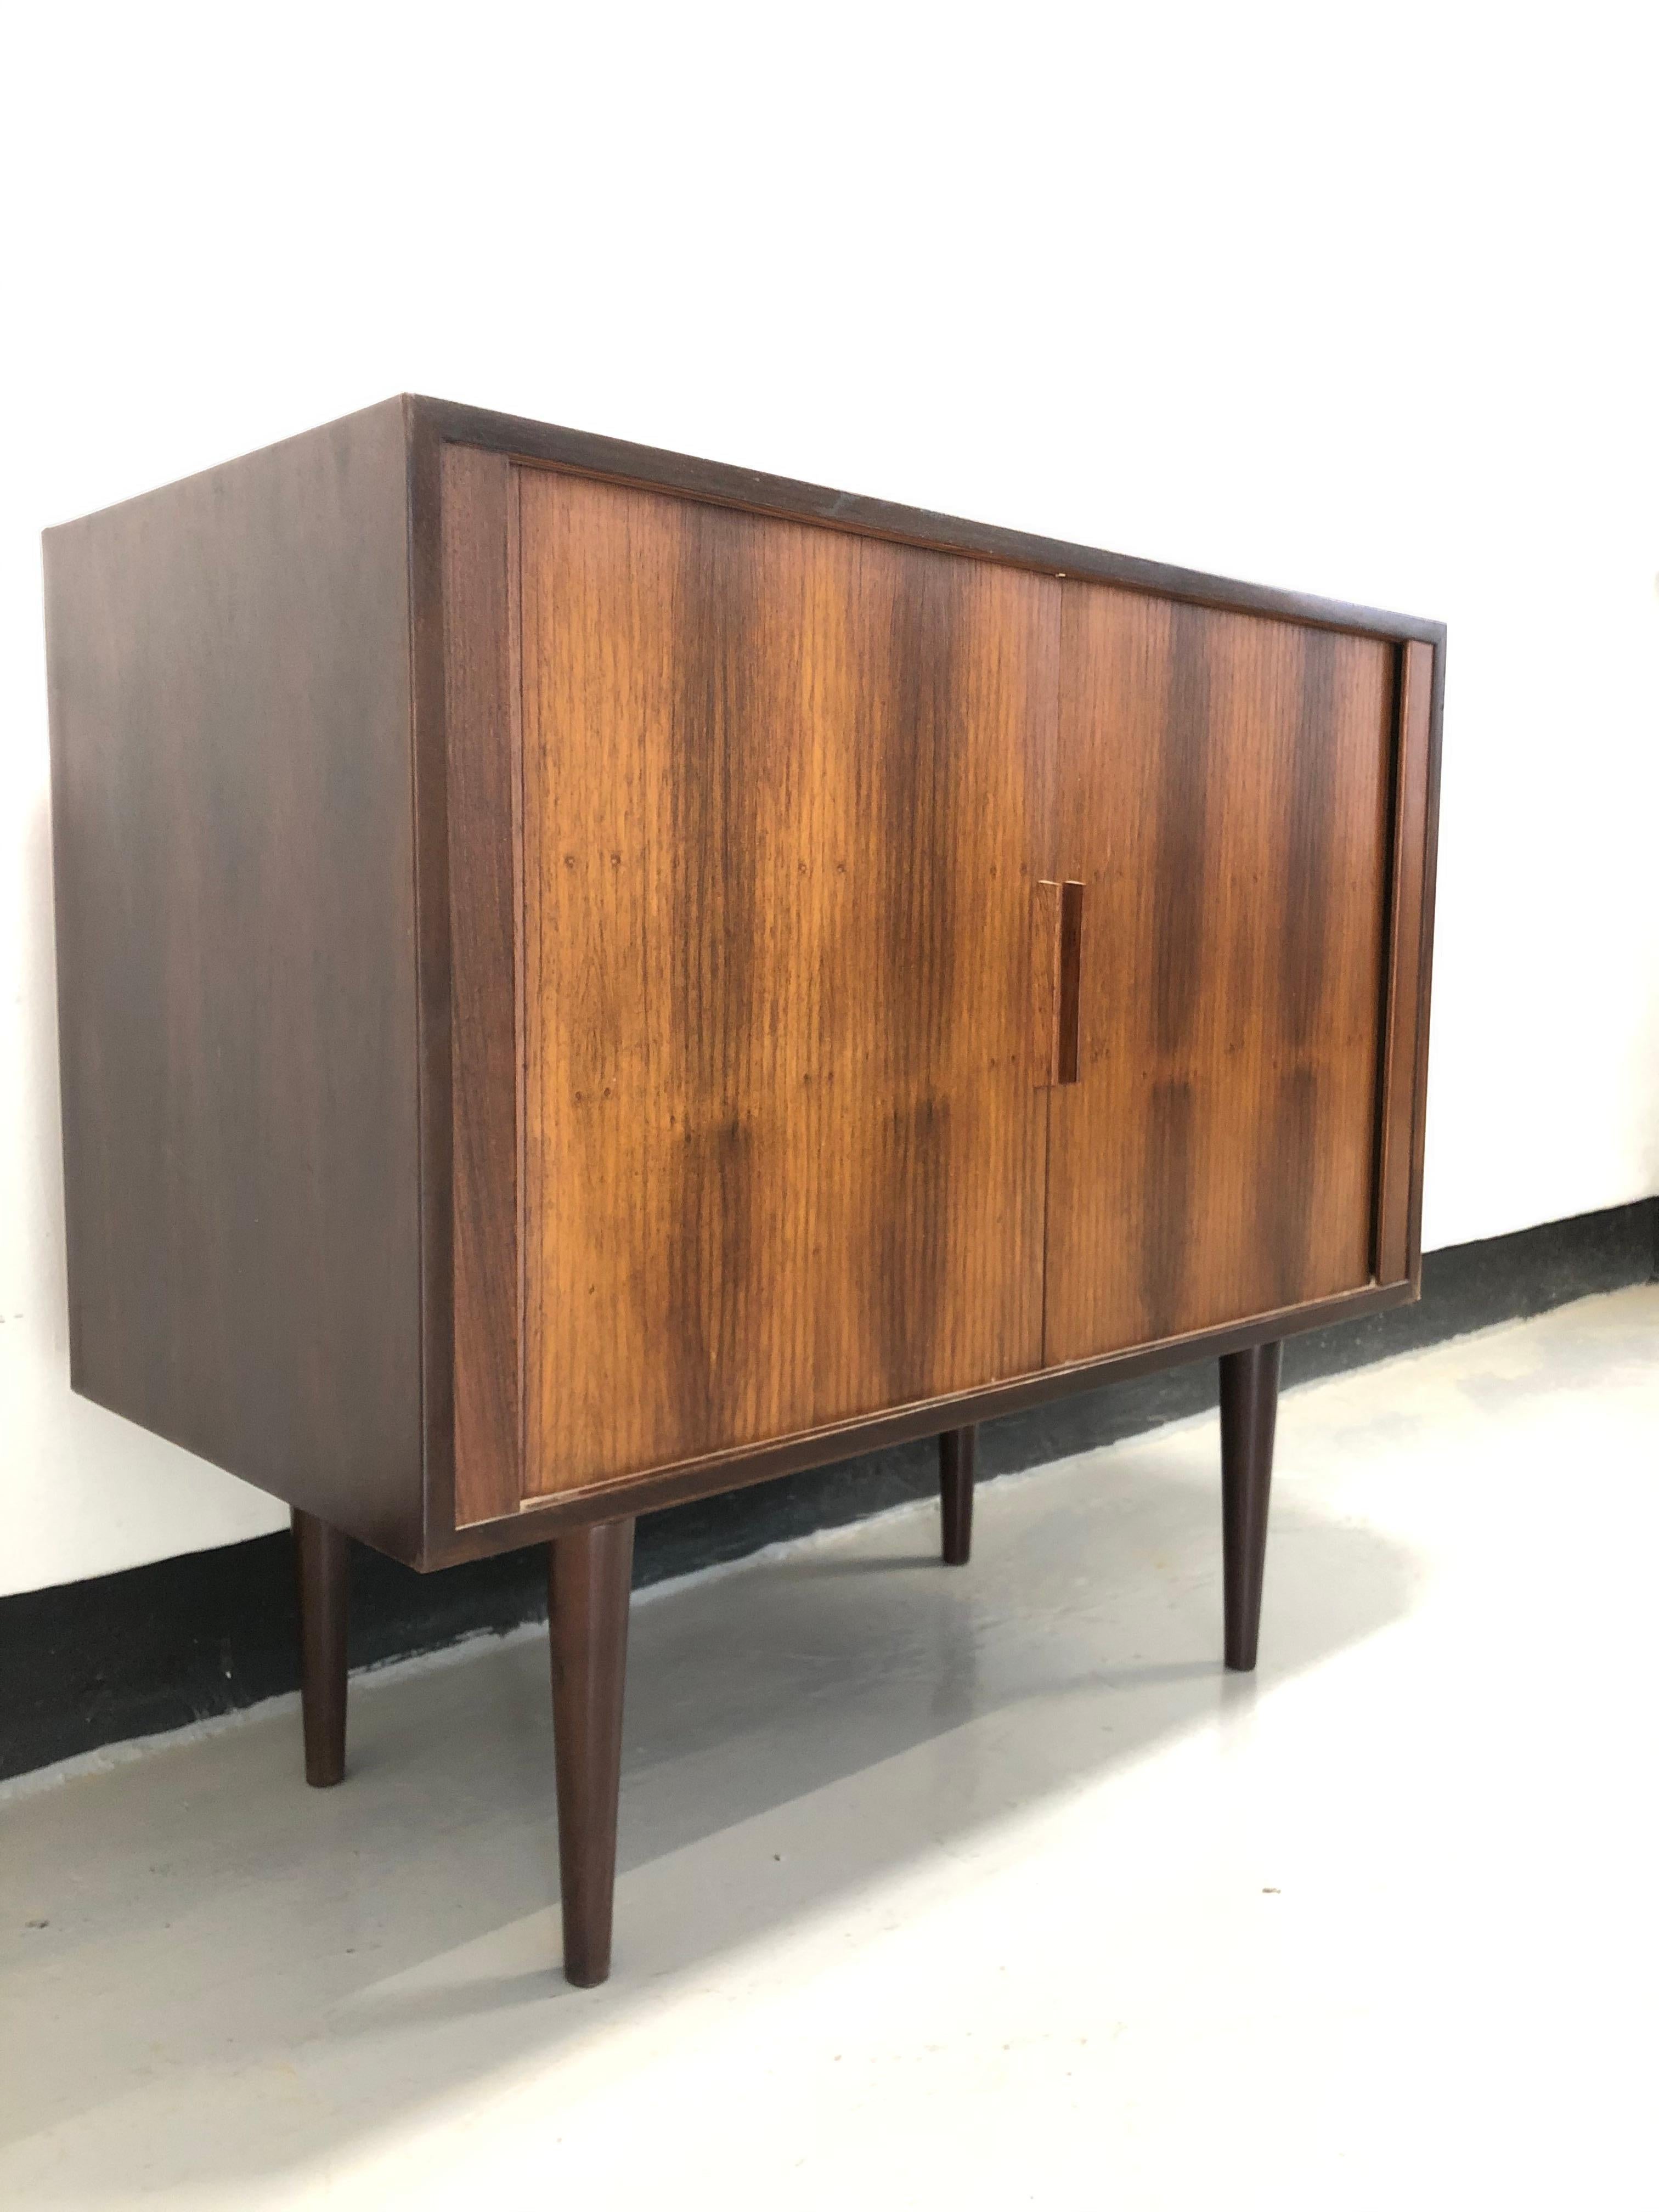 Model 42 rosewood sideboard with tambour doors and fitted interior.

Bearing maker's label to the back.